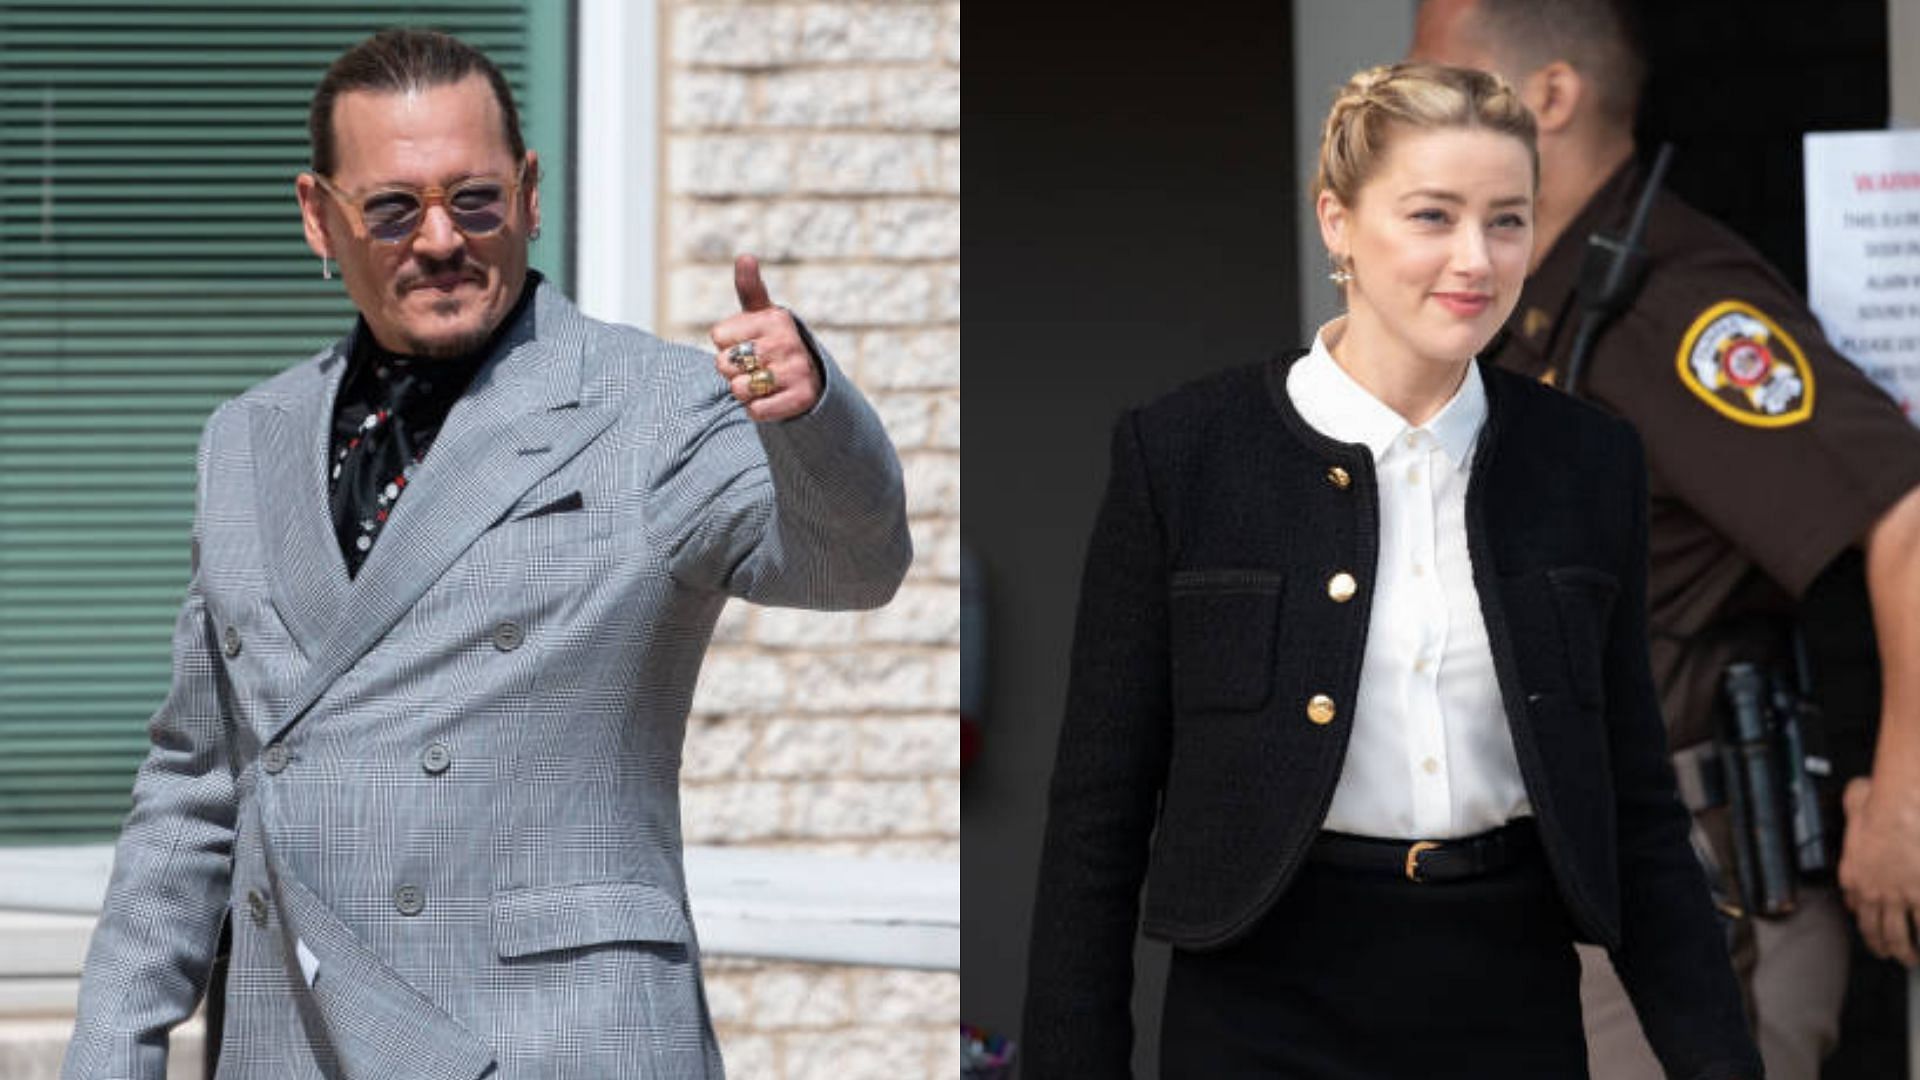 Johnny Depp X Amber Heard defamation trial at Fairfax, Virginia (Image via Consolidated News Pictures/Getty Images)